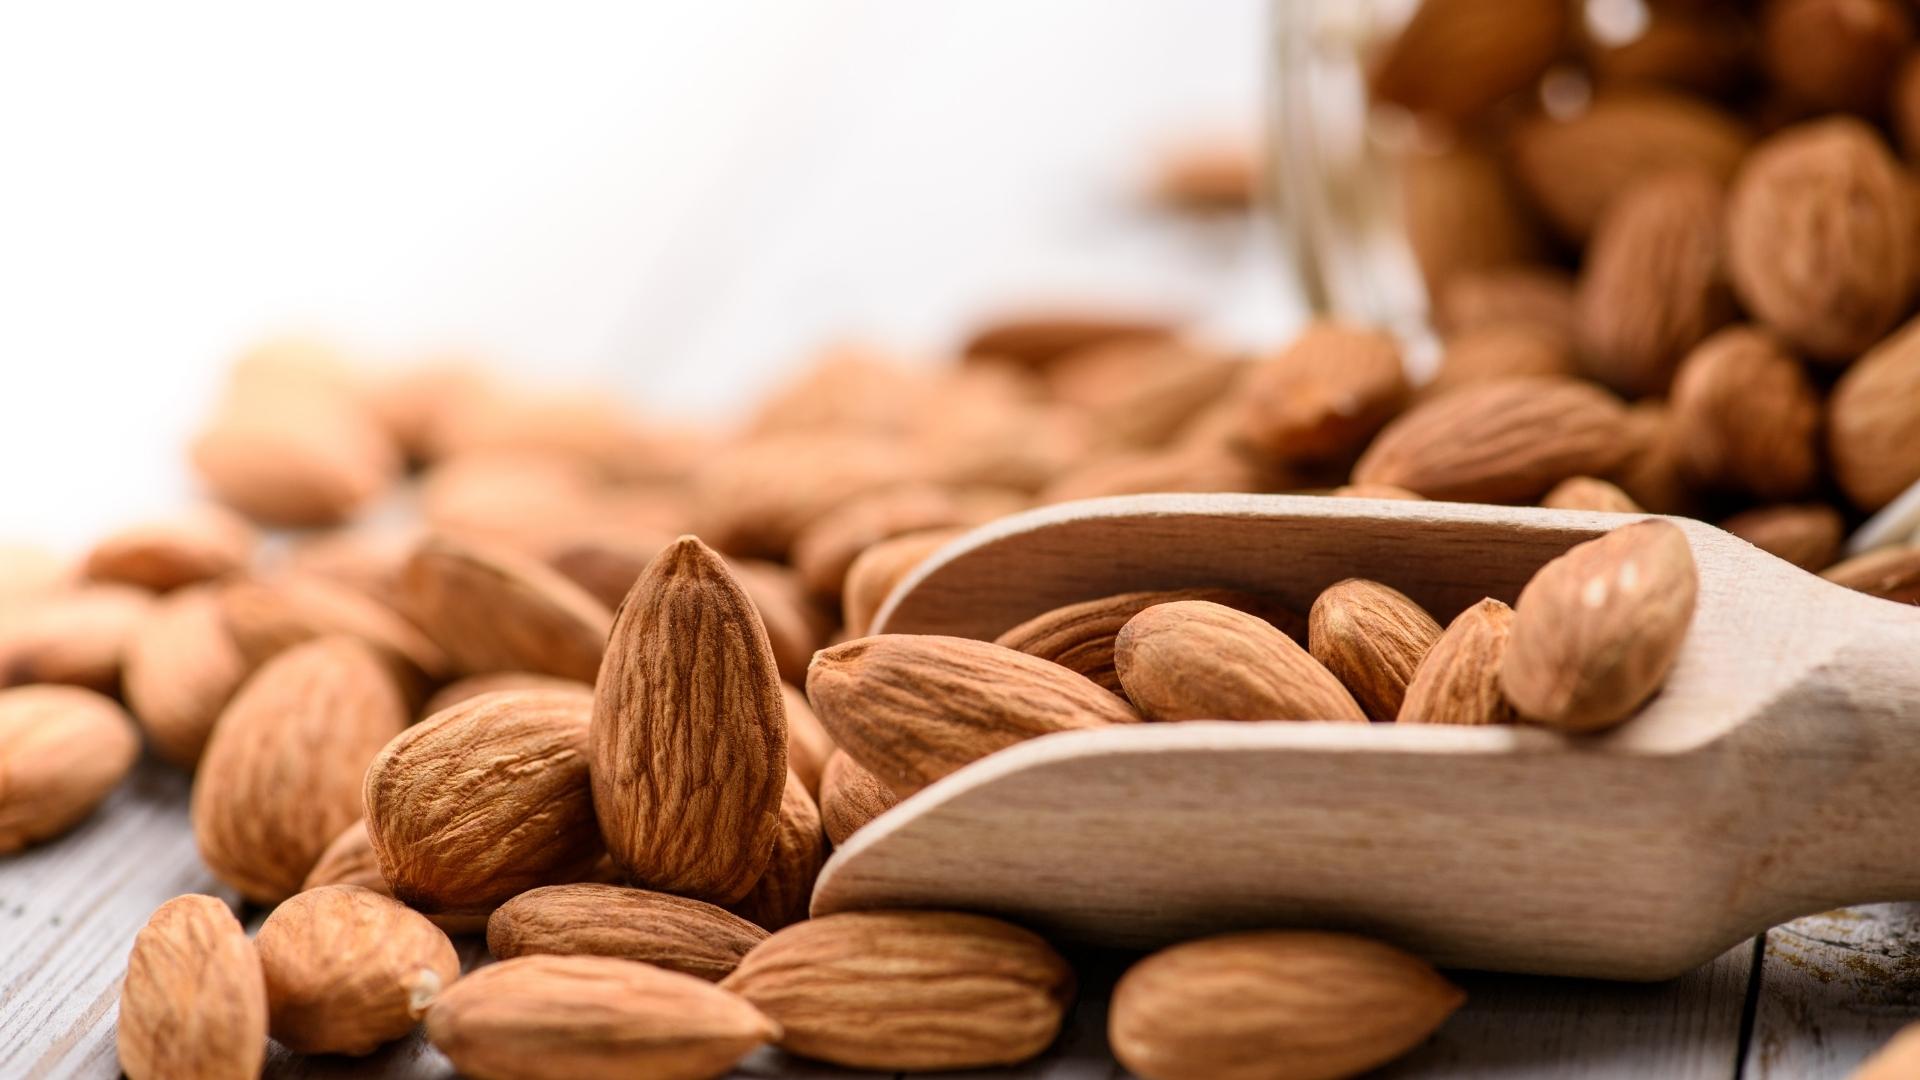 almonds and other whole food ingredients